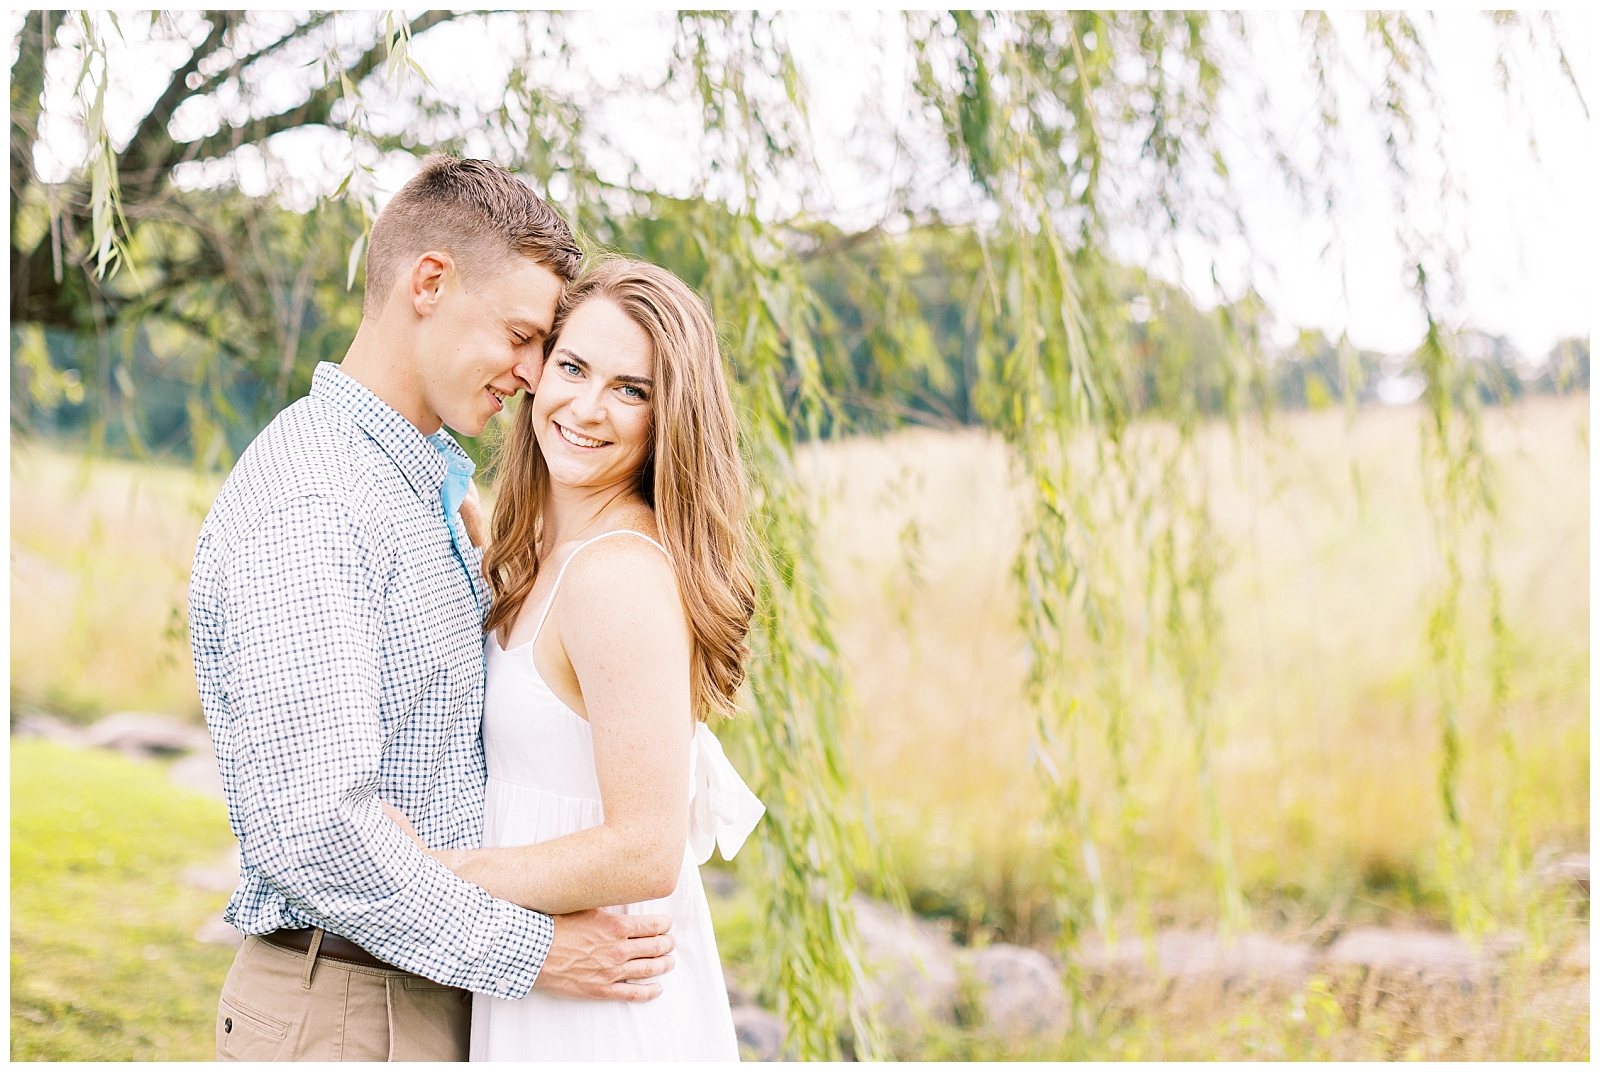 NC Museum of Art Engagement Photos in Raleigh, North Carolina